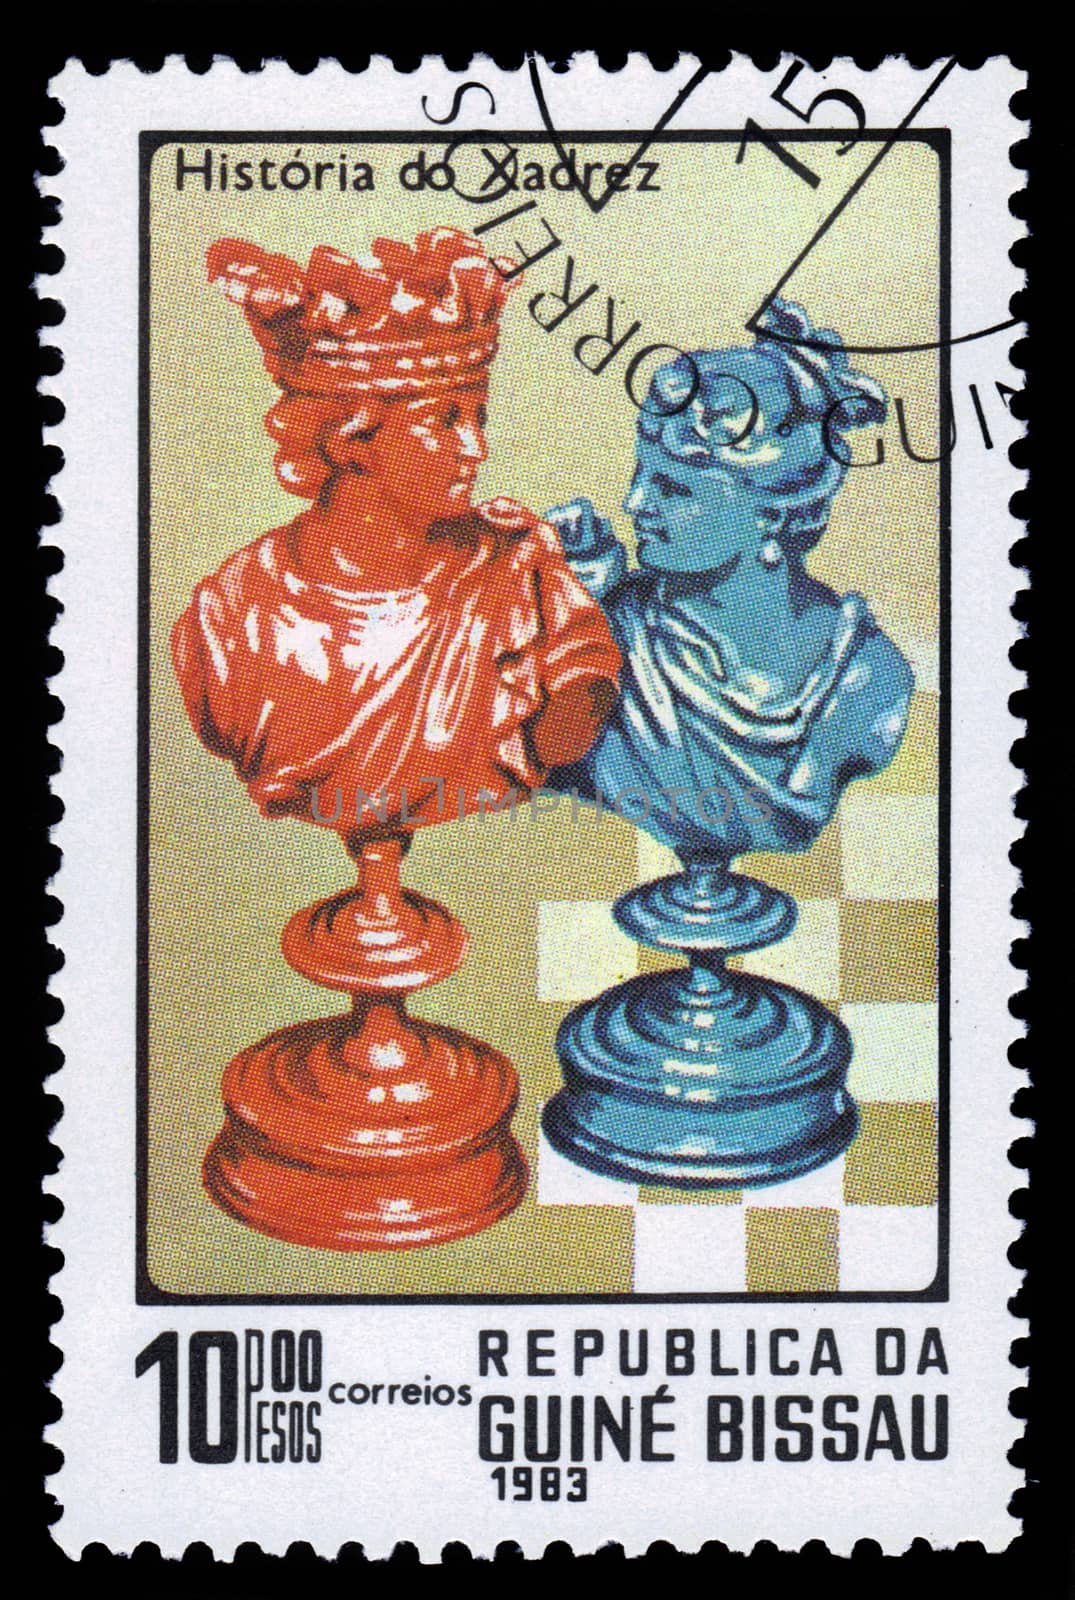 Guinea-Bissau, Republic - CIRCA 1983: A stamp printed by Guinea-Bissau, shows the chess pieces, series History of Chess, circa 1983